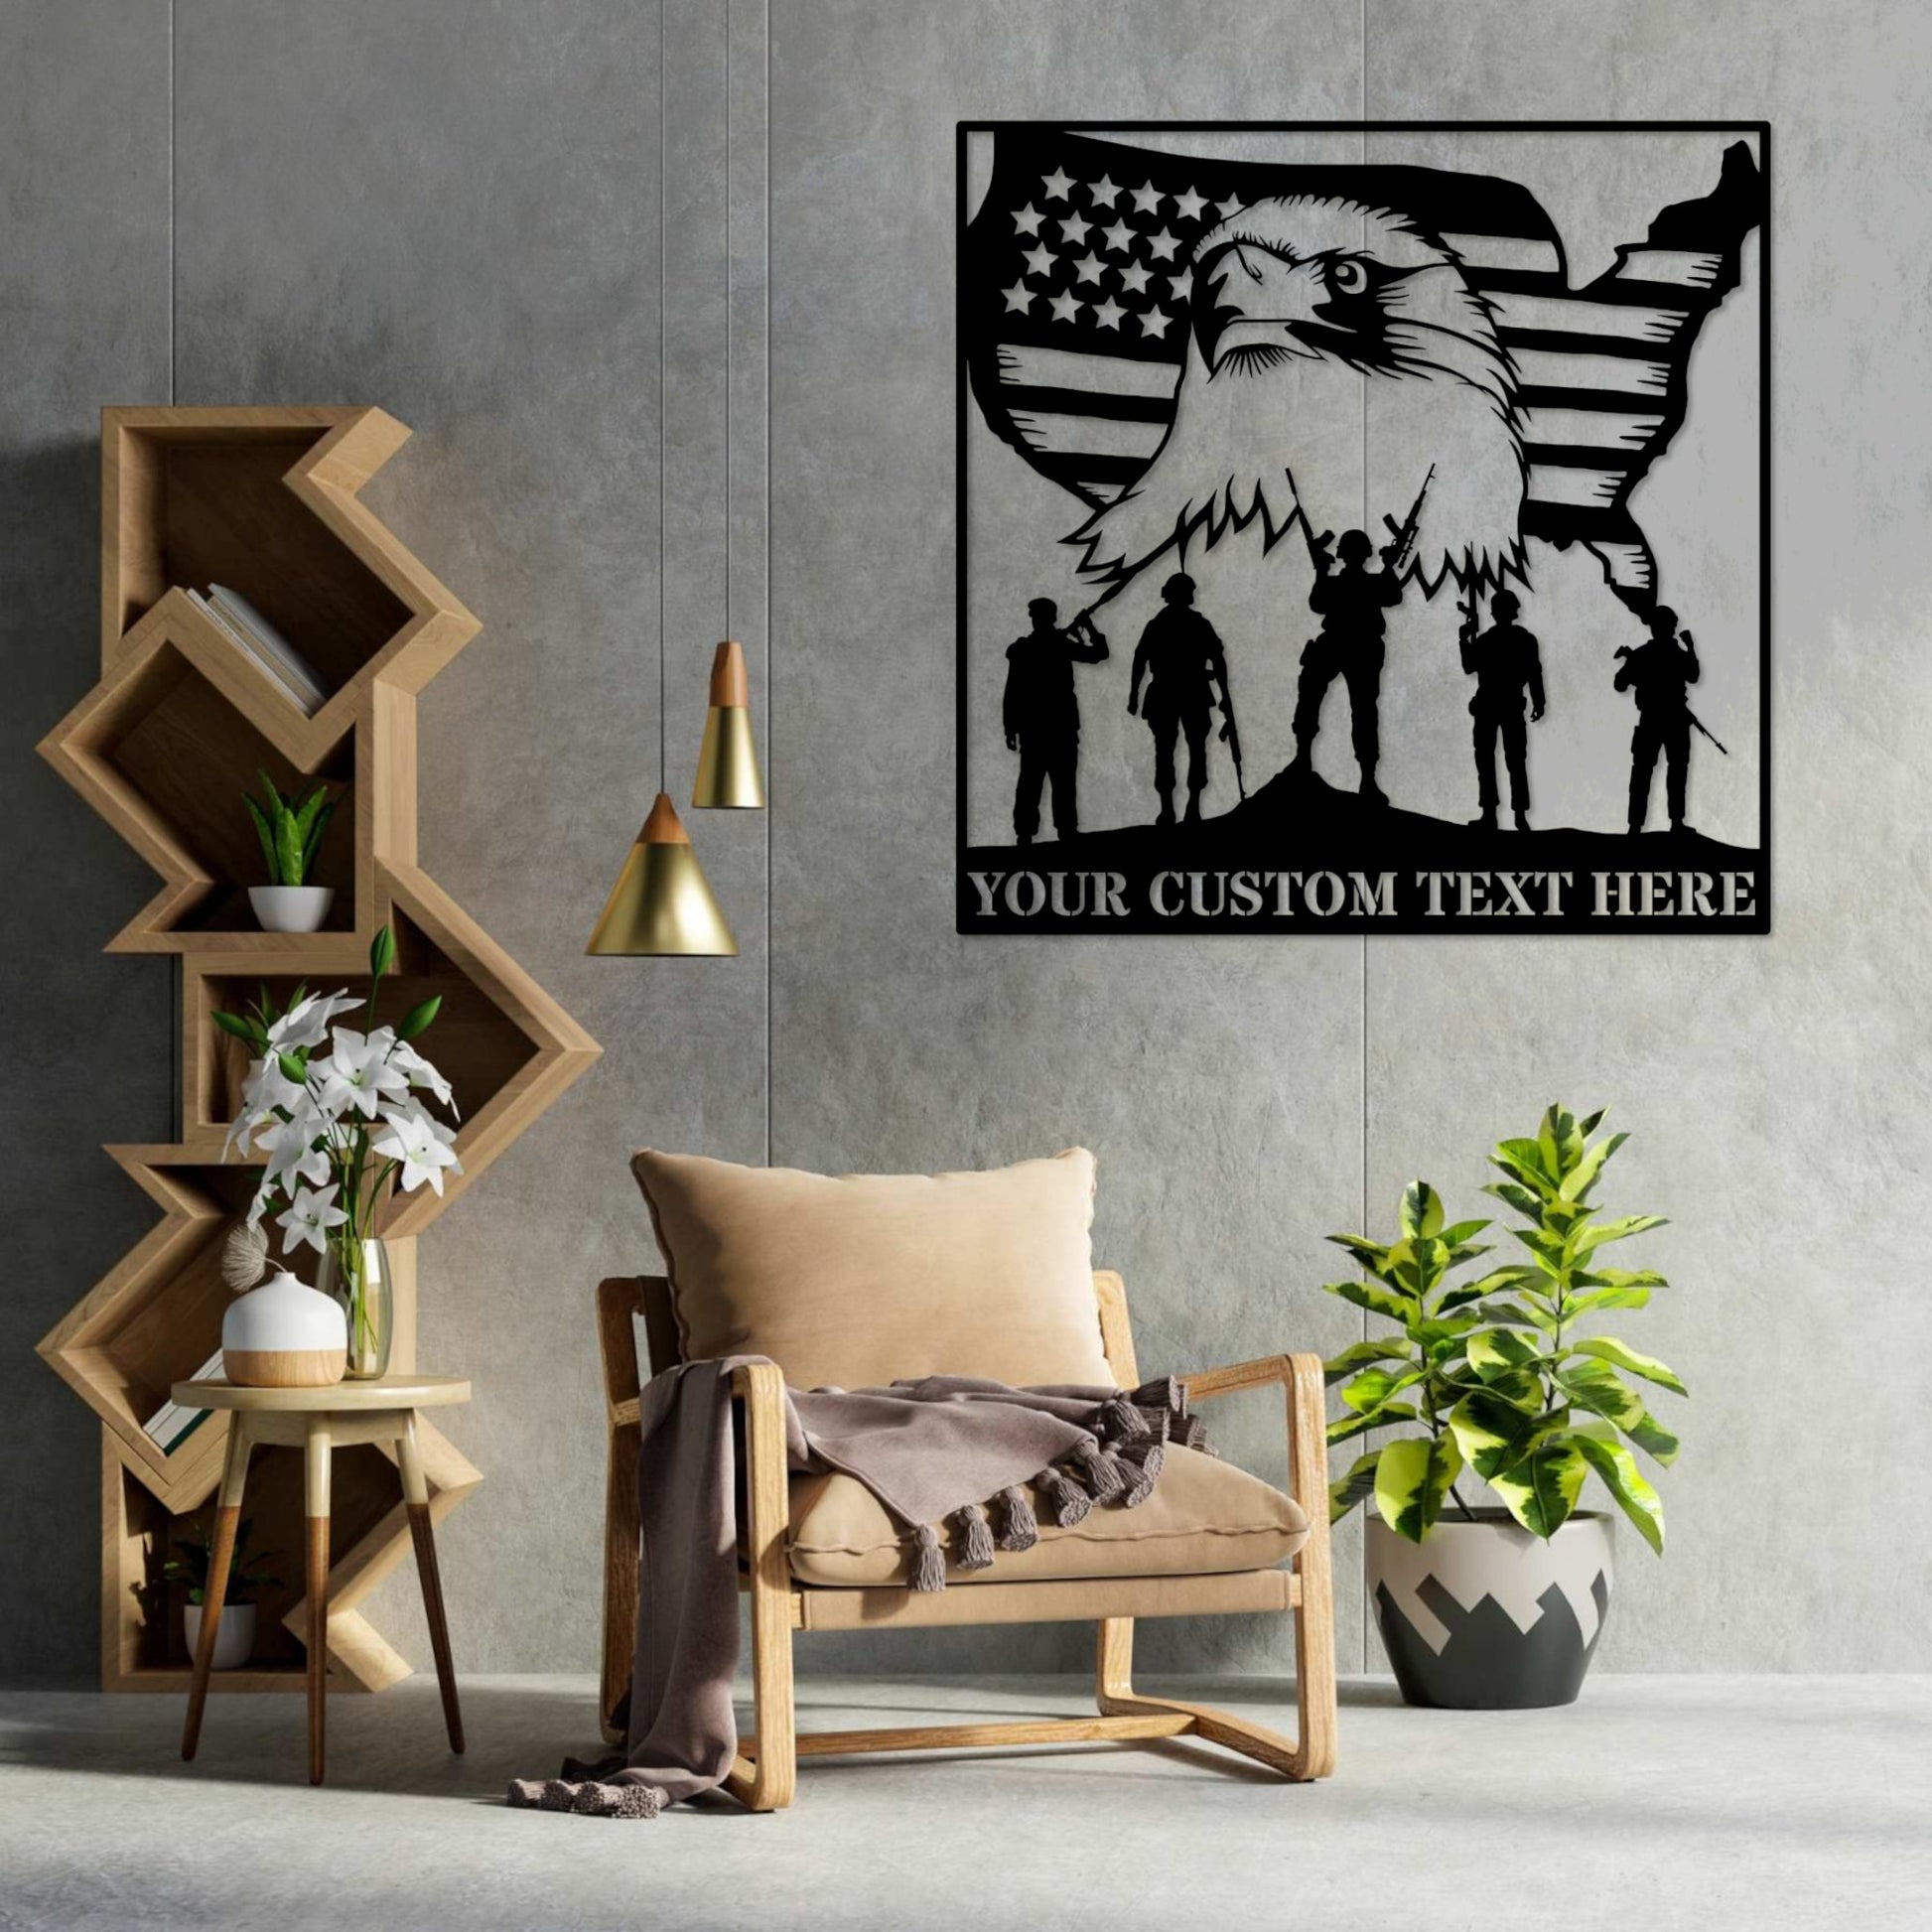 Personalized US Flag Military Eagle Name Metal Sign. Patriotic Wall Art Decor. Customized US Soldier Wall Hanging. American Veteran Freedom